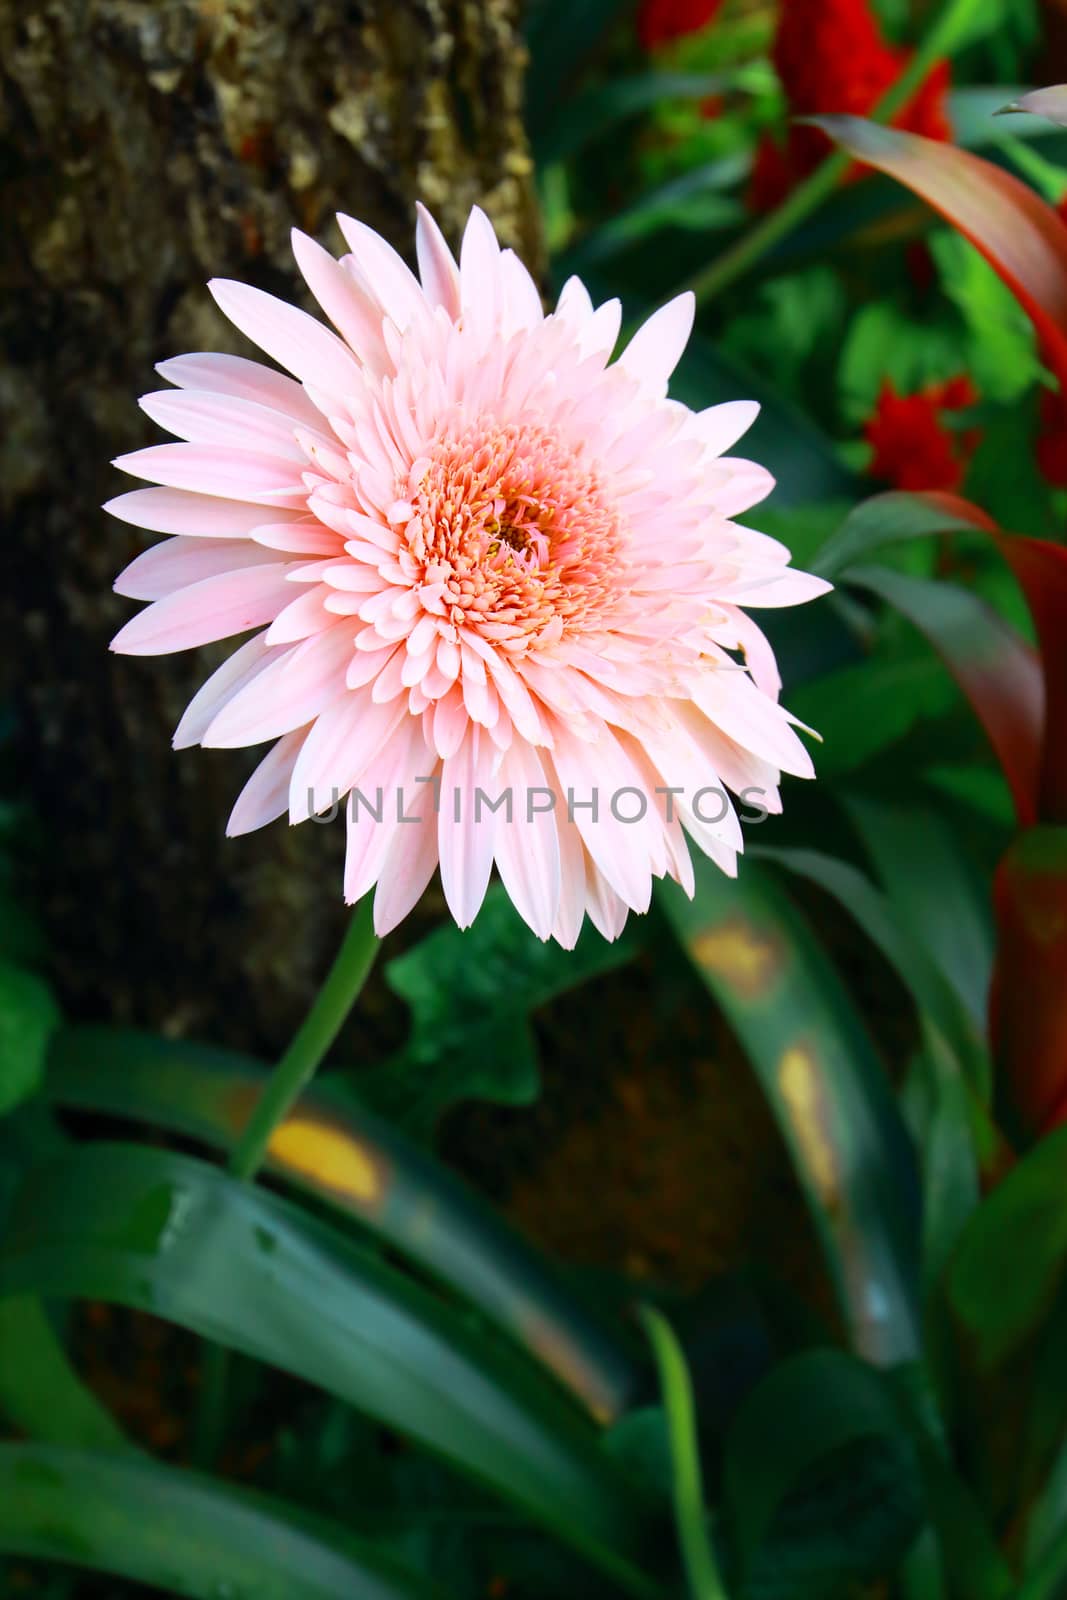 The gerbera have pink color in full bloom.